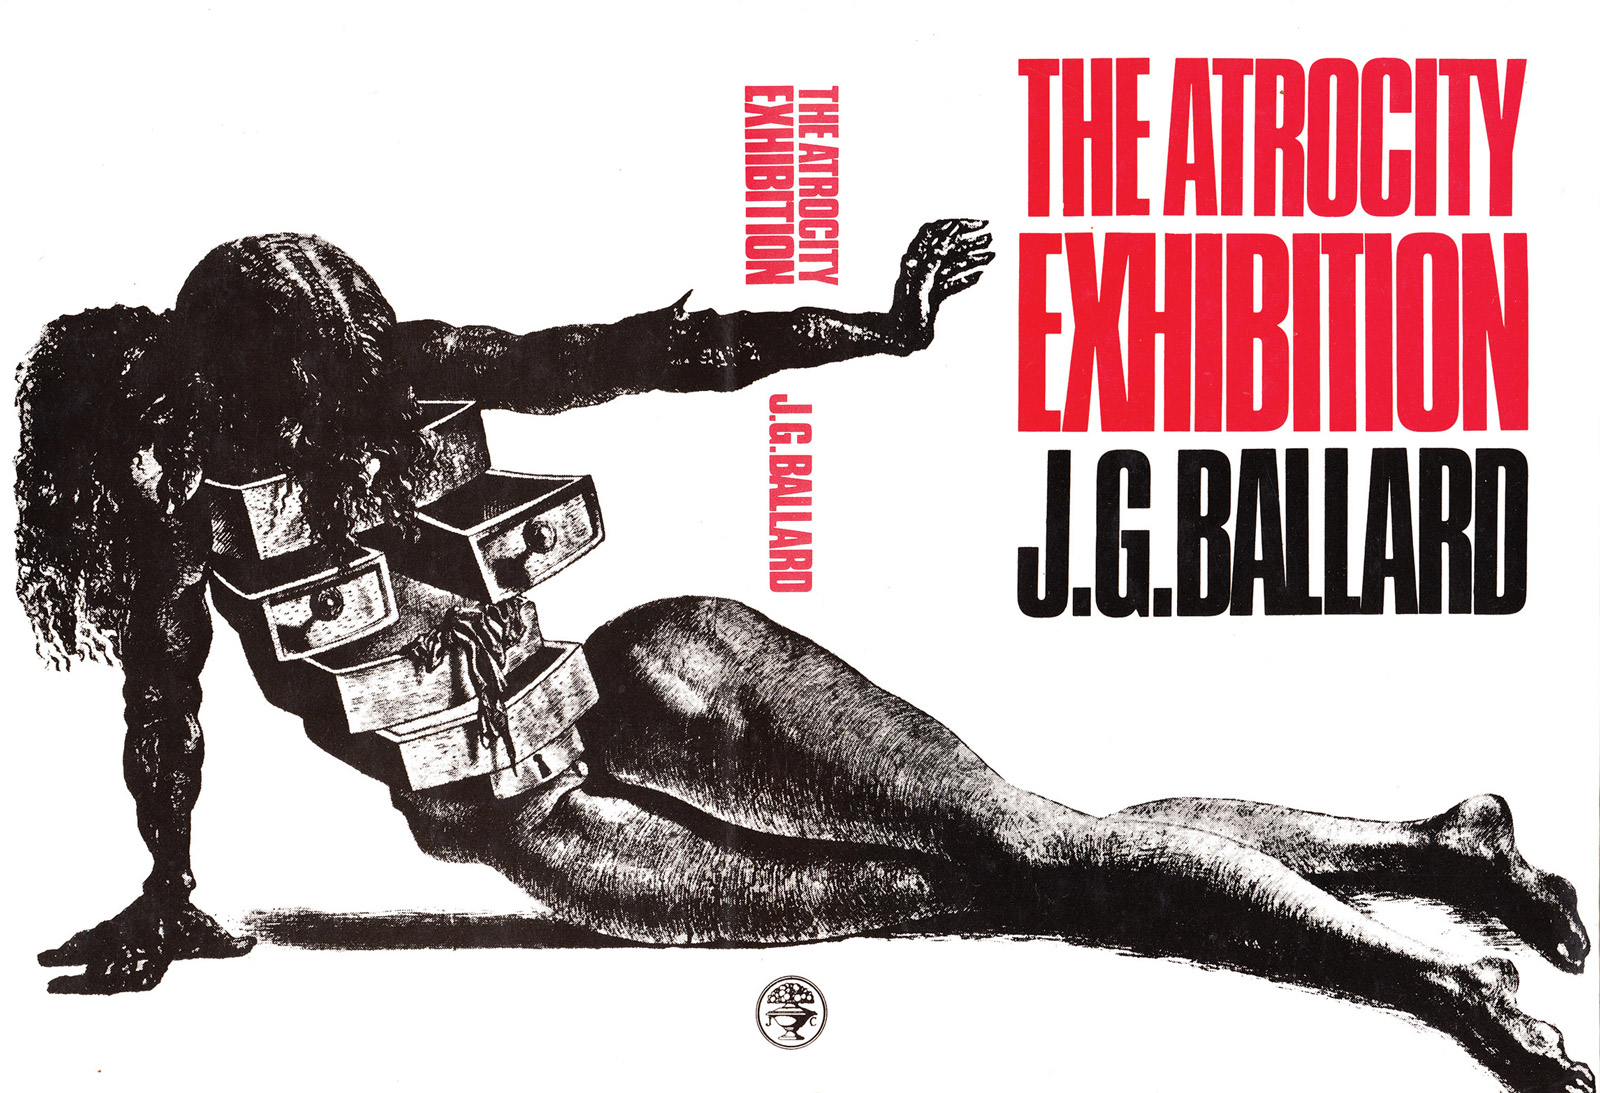 Cover of first UK edition of Ballard’s The Atrocity Exhibition, published by Jonathan Cape in 1970.